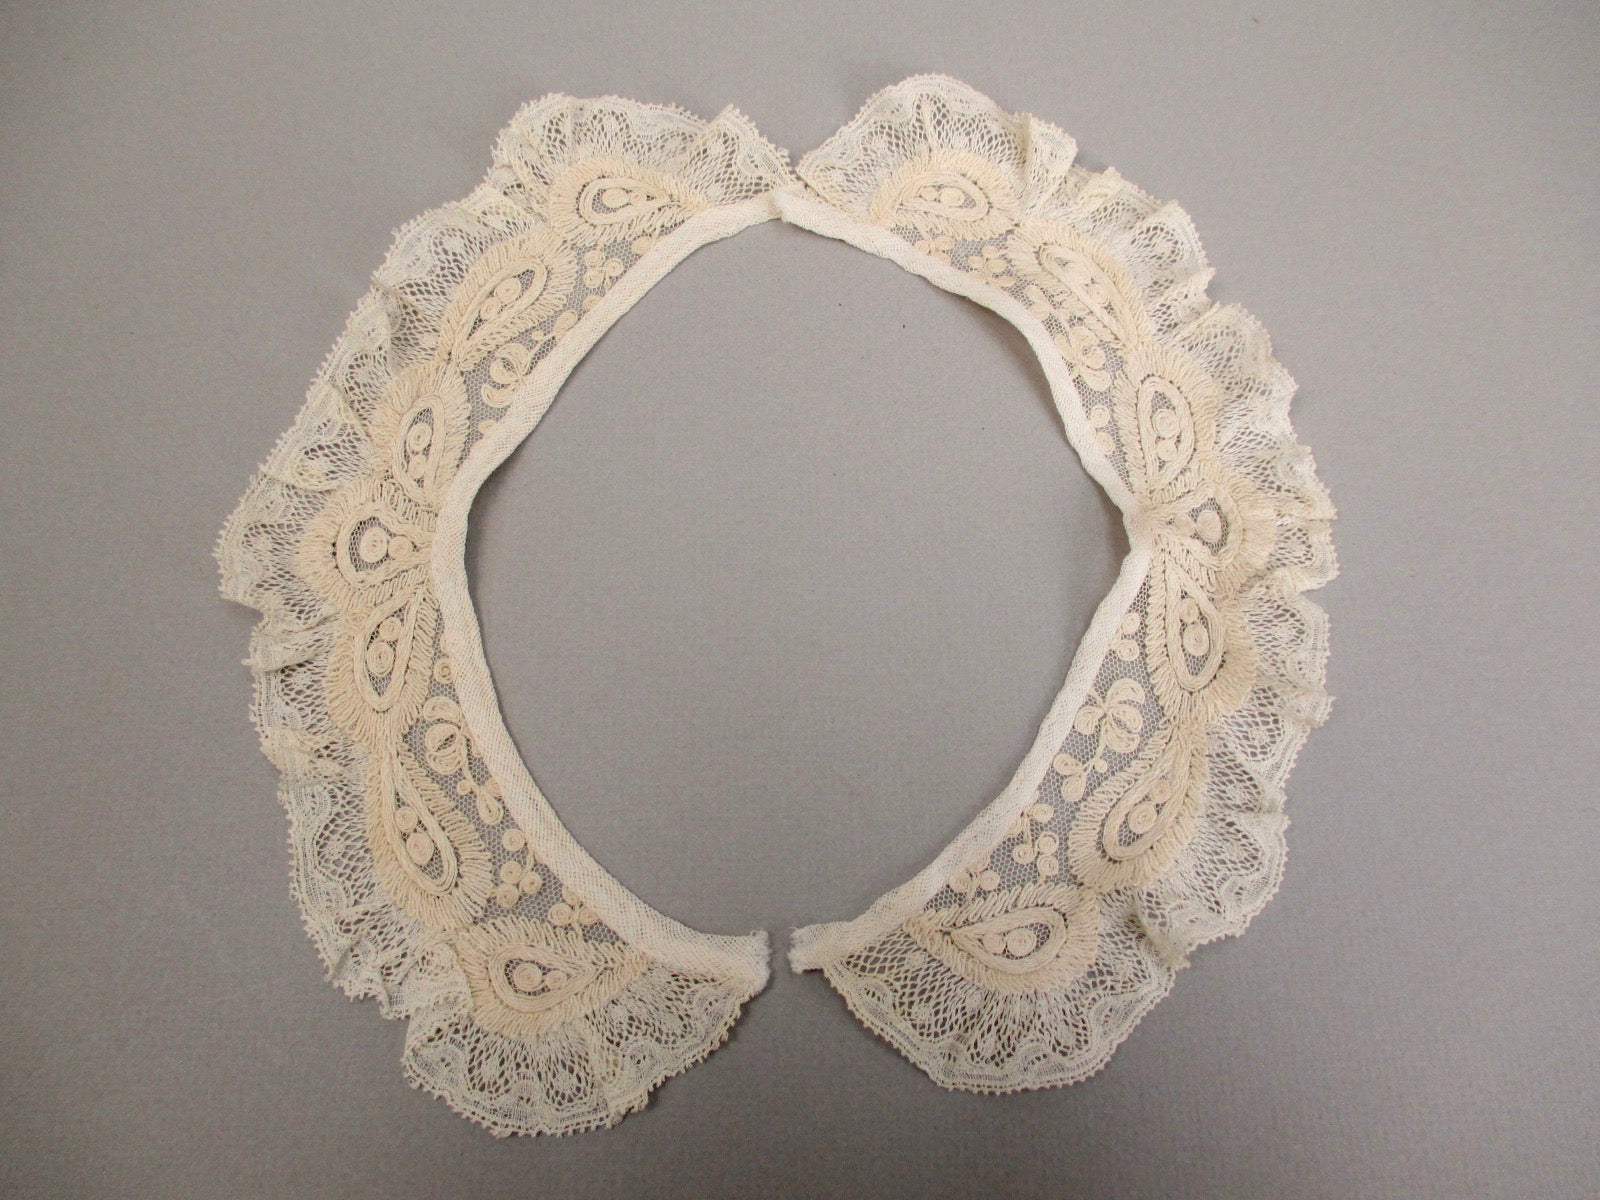 Antique lace collar w Tambour embroidery Victorian